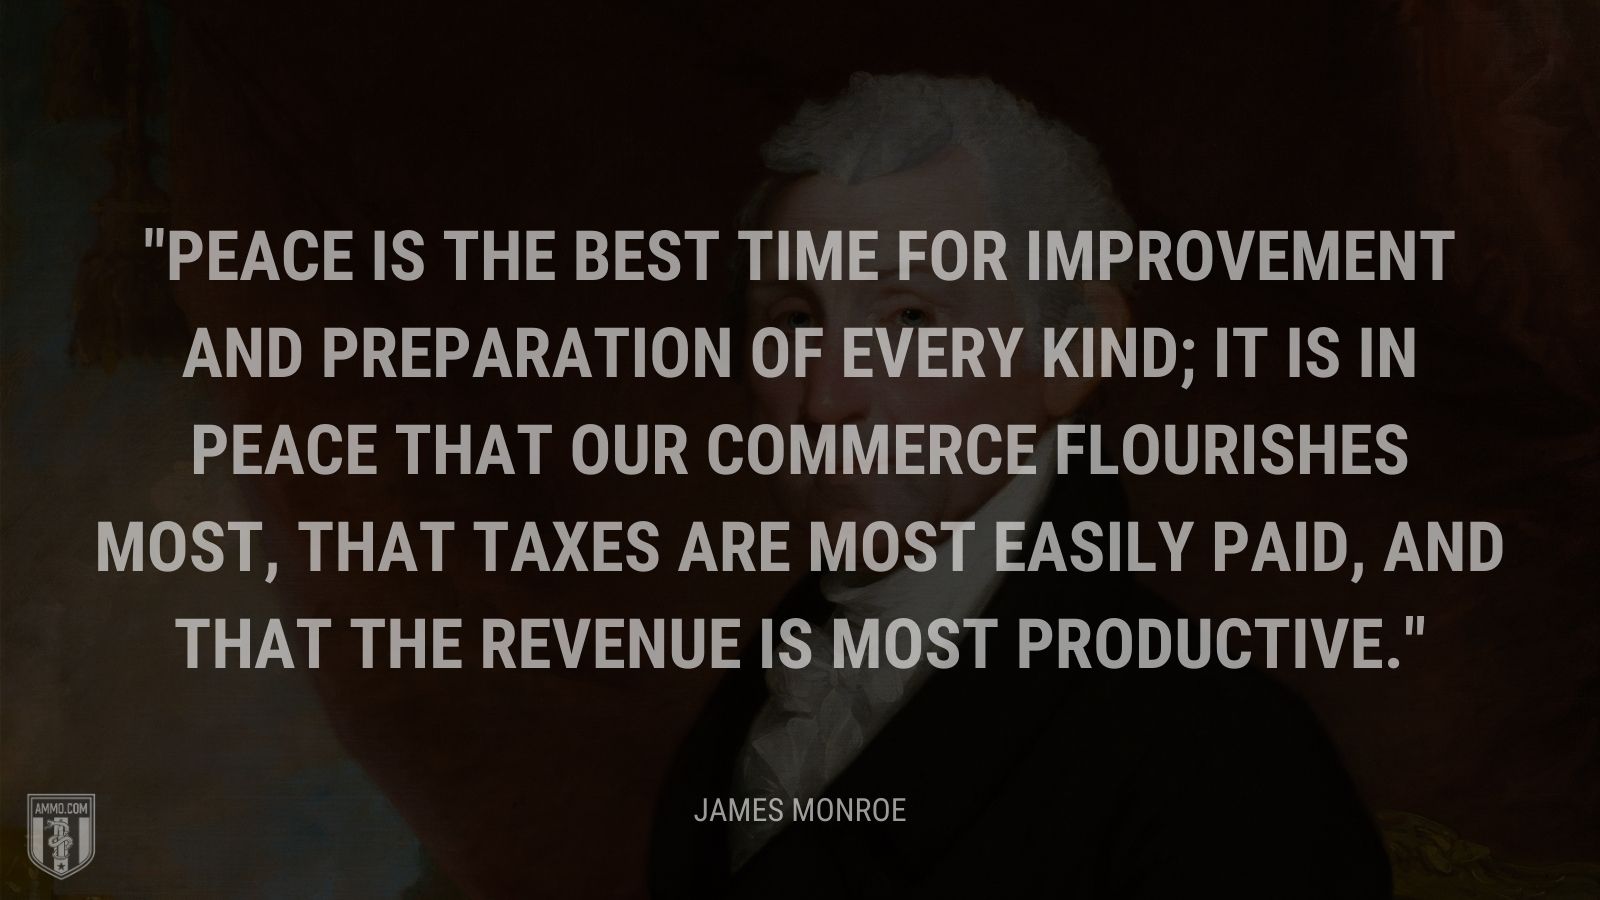 “Peace is the best time for improvement and preparation of every kind; it is in peace that our commerce flourishes most, that taxes are most easily paid, and that the revenue is most productive.” - James Monroe